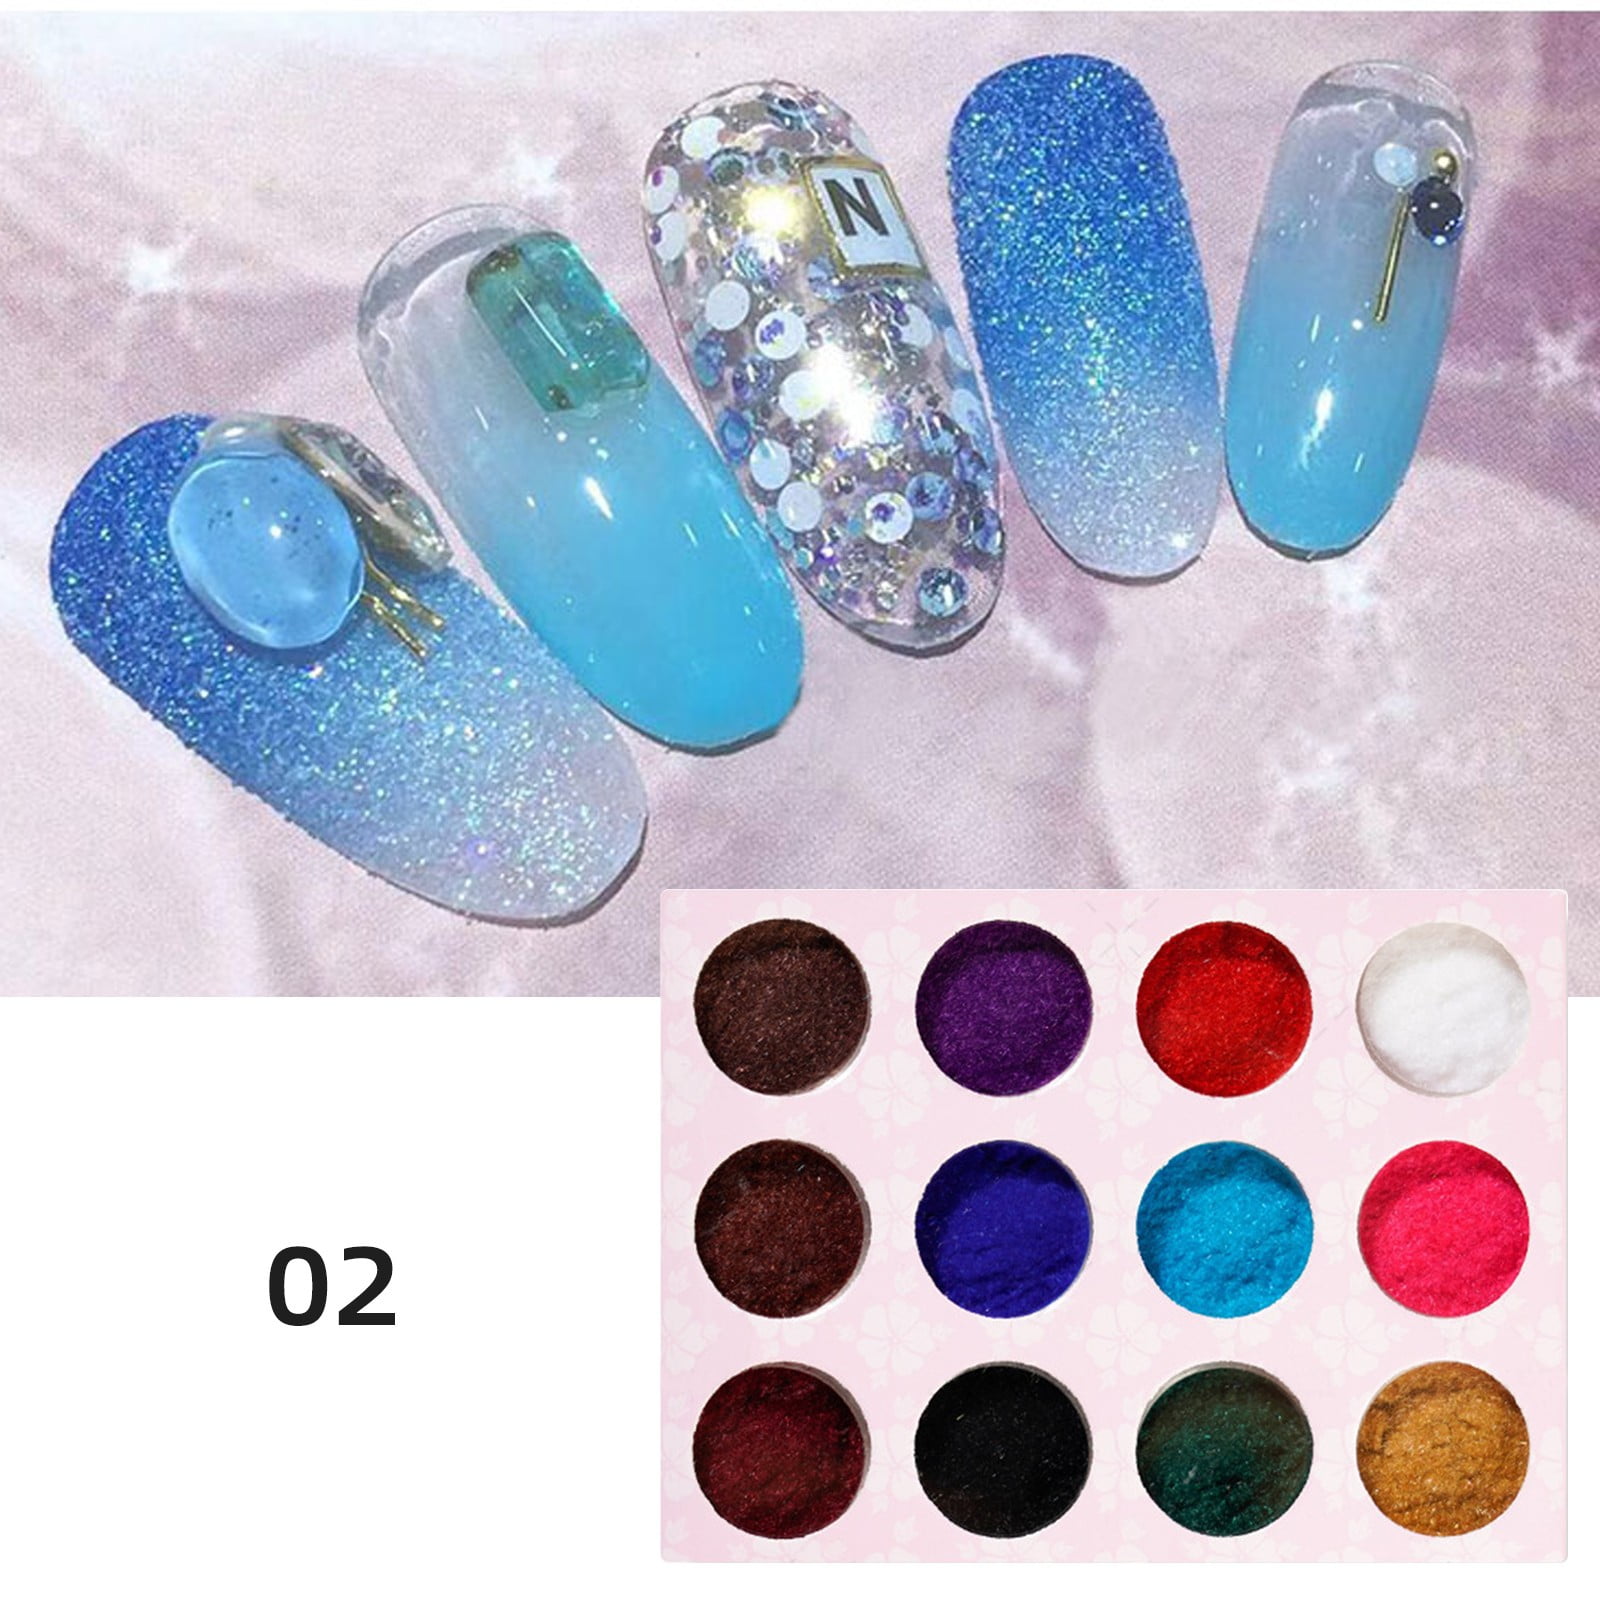  BASEMMAHER 2 Colors Christmas Black White Dust Sugar Nail  Glitter Powder Shiny Diamond Shining Effect Powder Superfine French  Iridescent Snow Candy Coat Nails Sweater Manicure Decorations DIY Crafts :  Beauty 